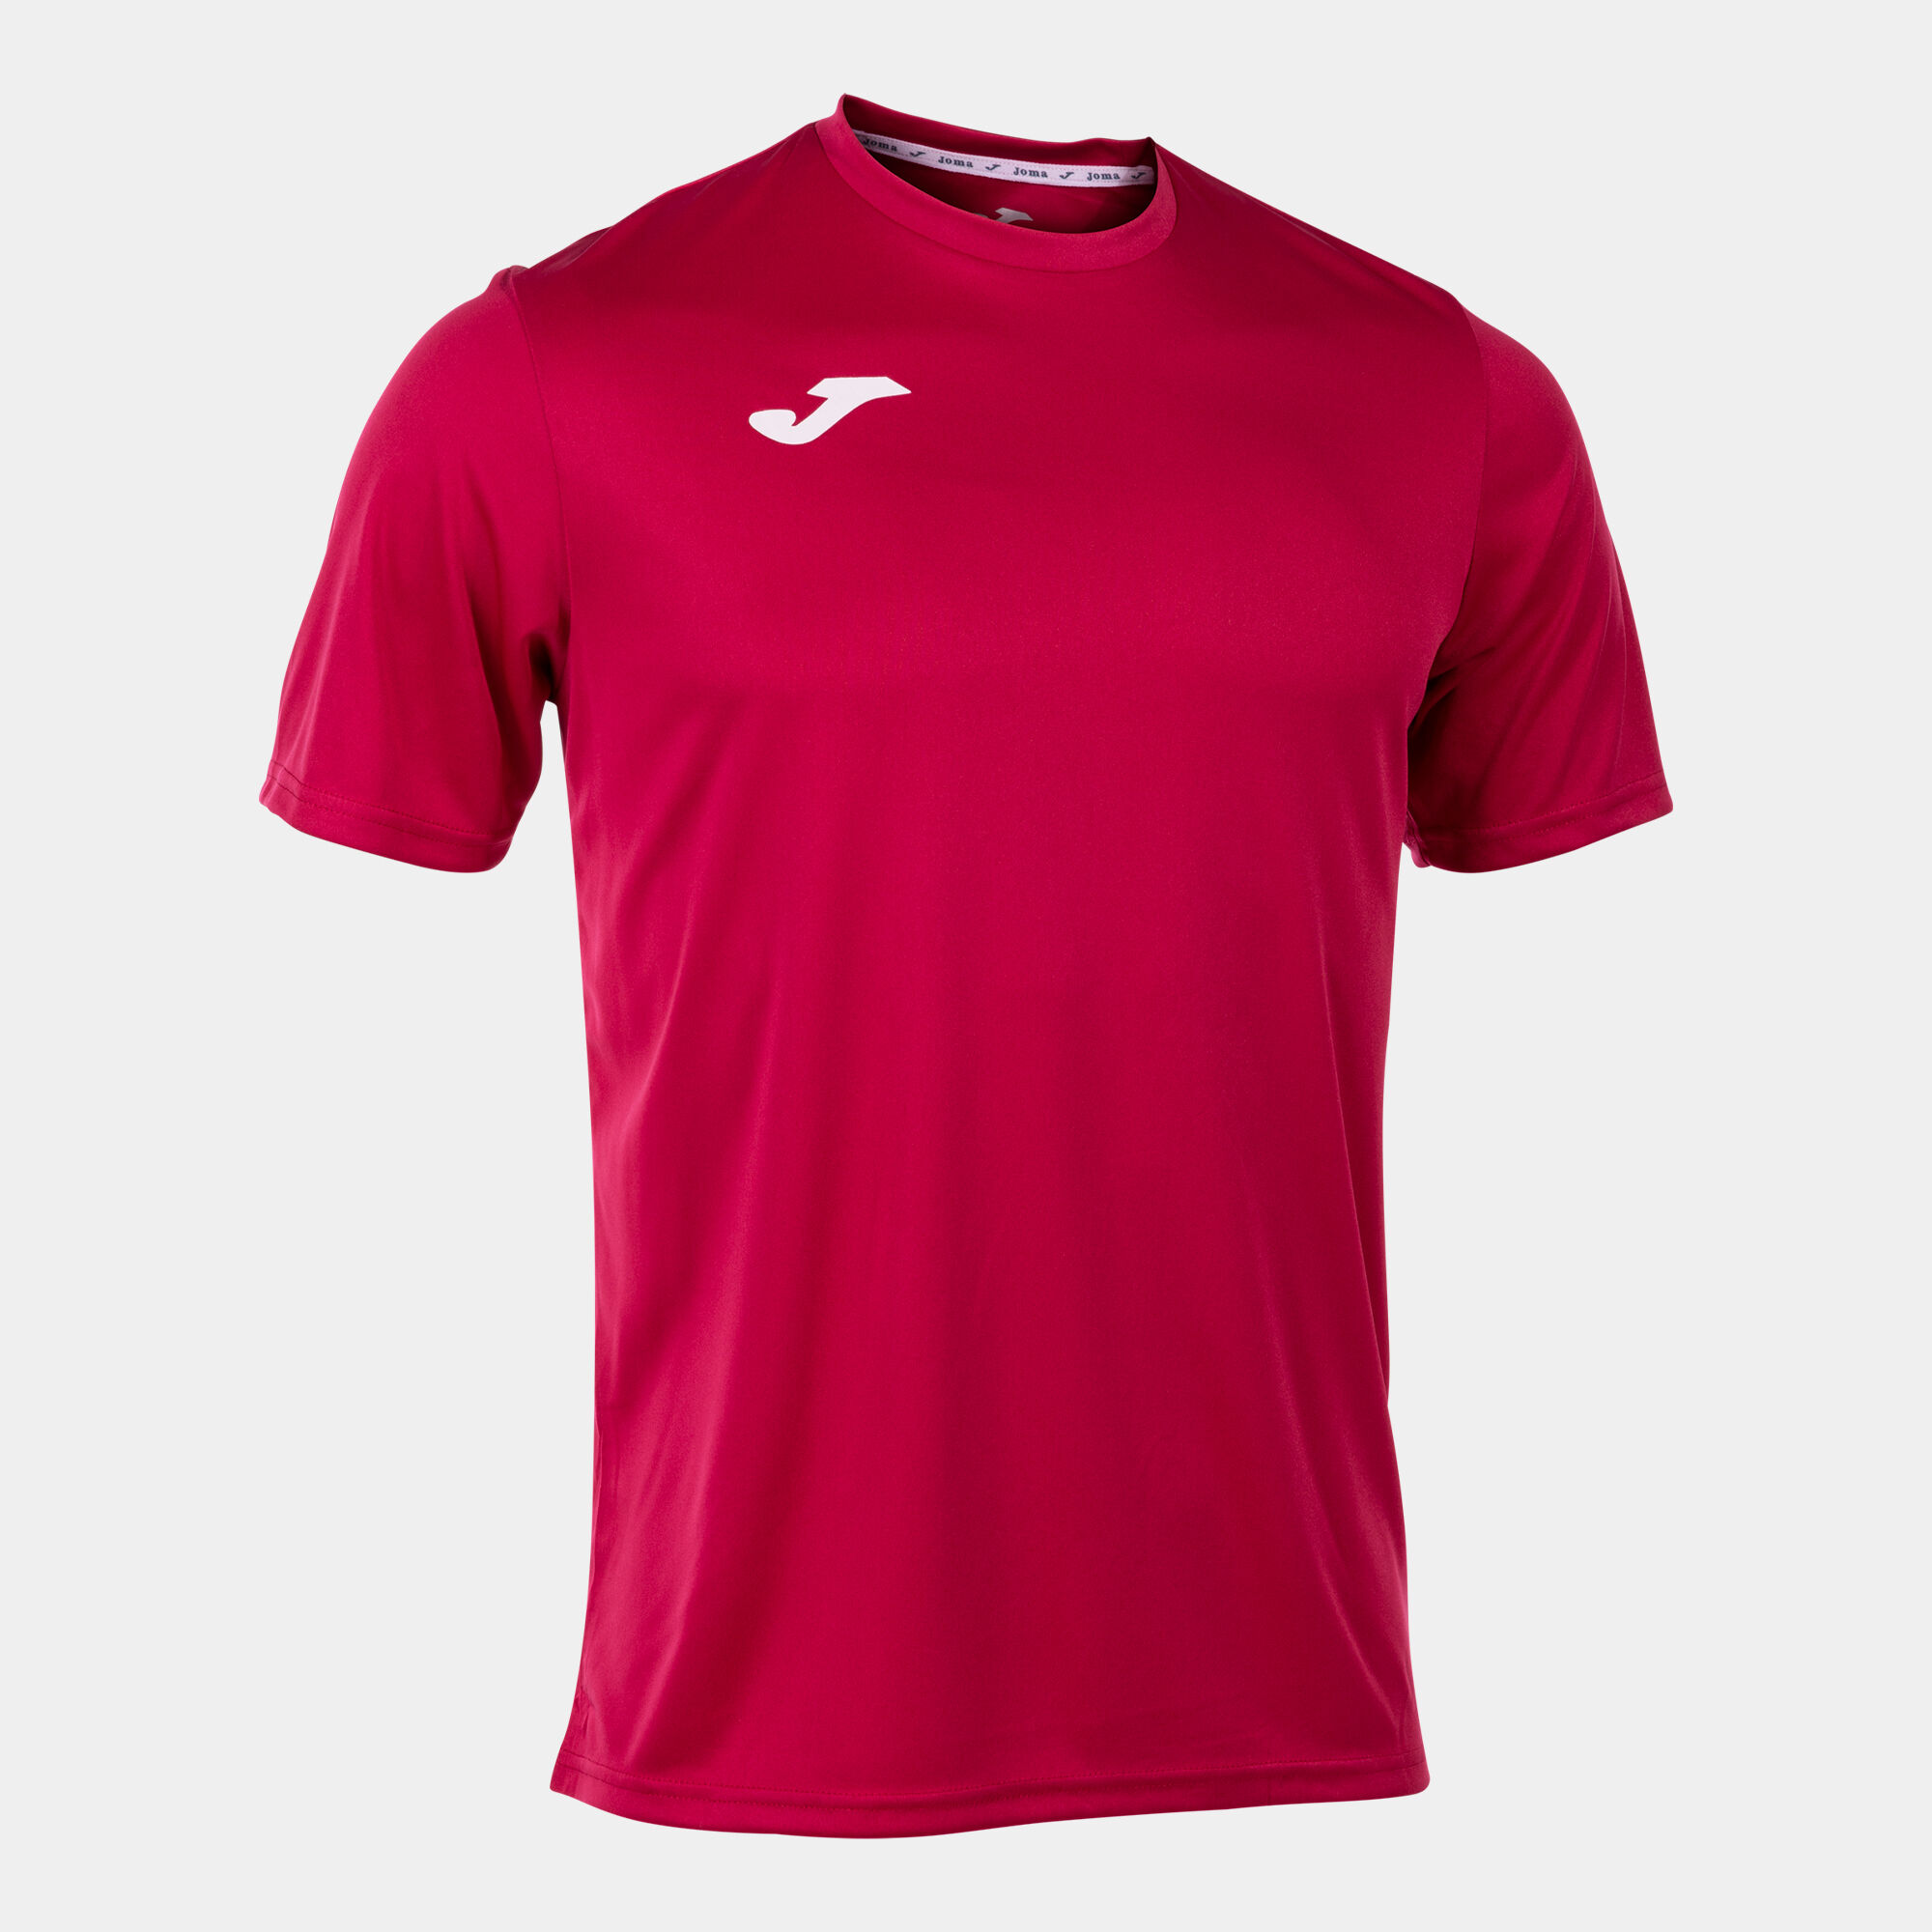 Maillot manches courtes homme Combi fuchsia